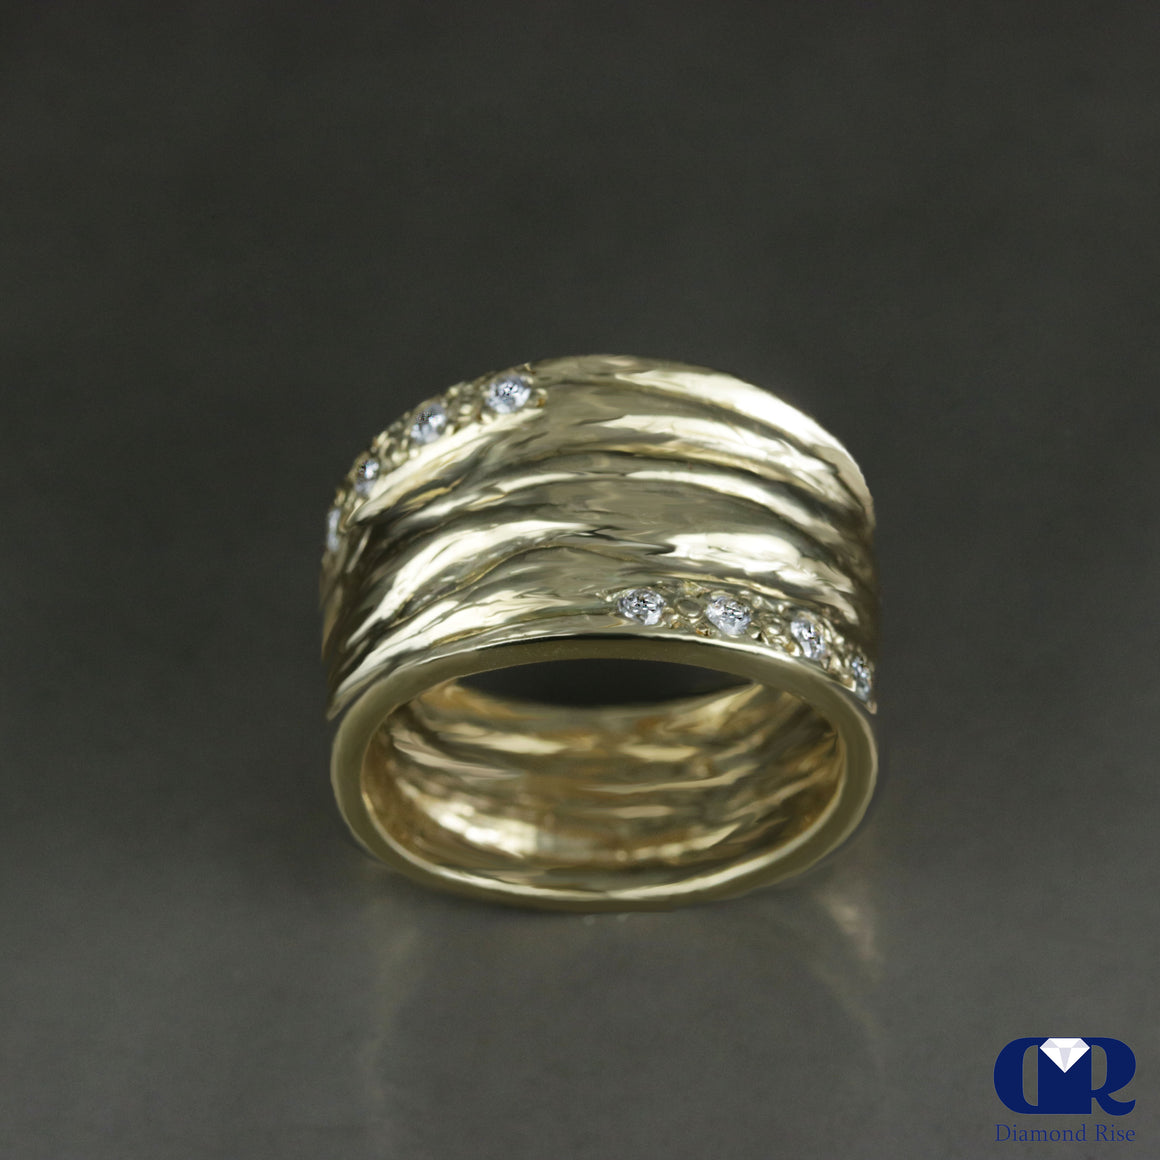 Handmade Diamond Right Hand Ring / Cocktail Ring In 14K Gold - Diamond Rise Jewelry